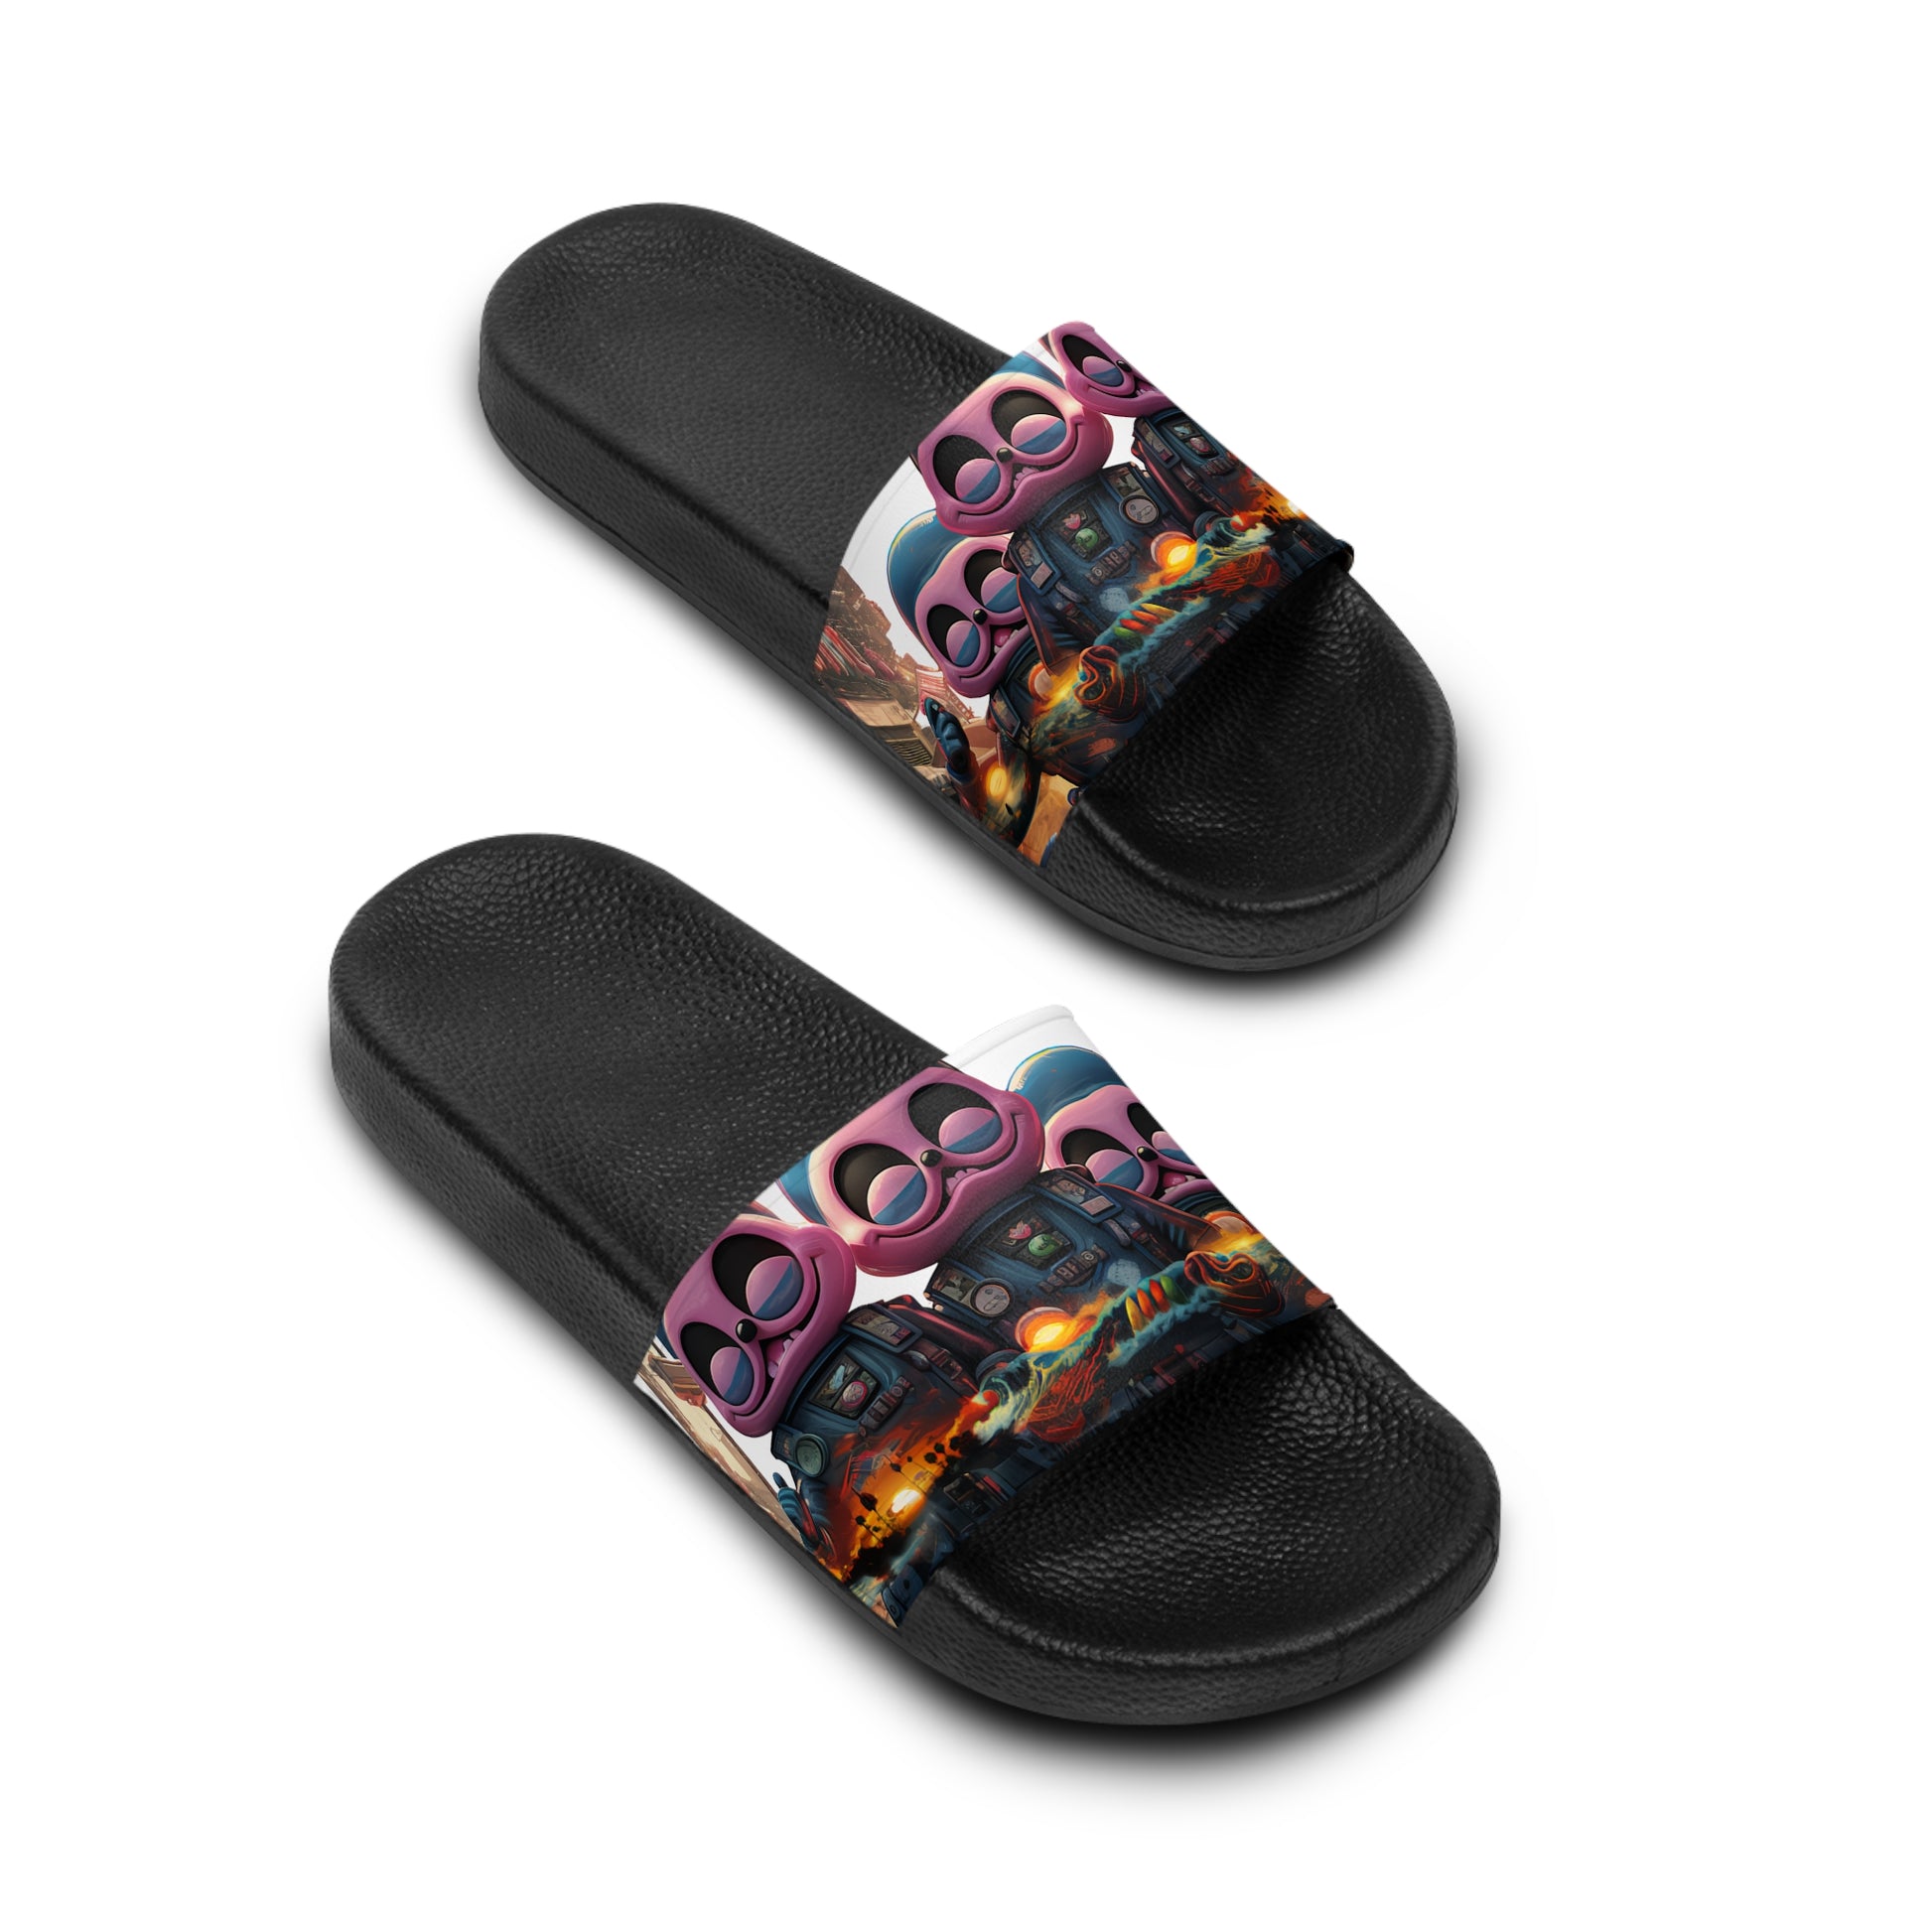 Step into surreal style with Pink Elephant Aliens: Beach Women's Slide Sandals. Aliens meet beach vibes, exclusively at Stashbox.ai.